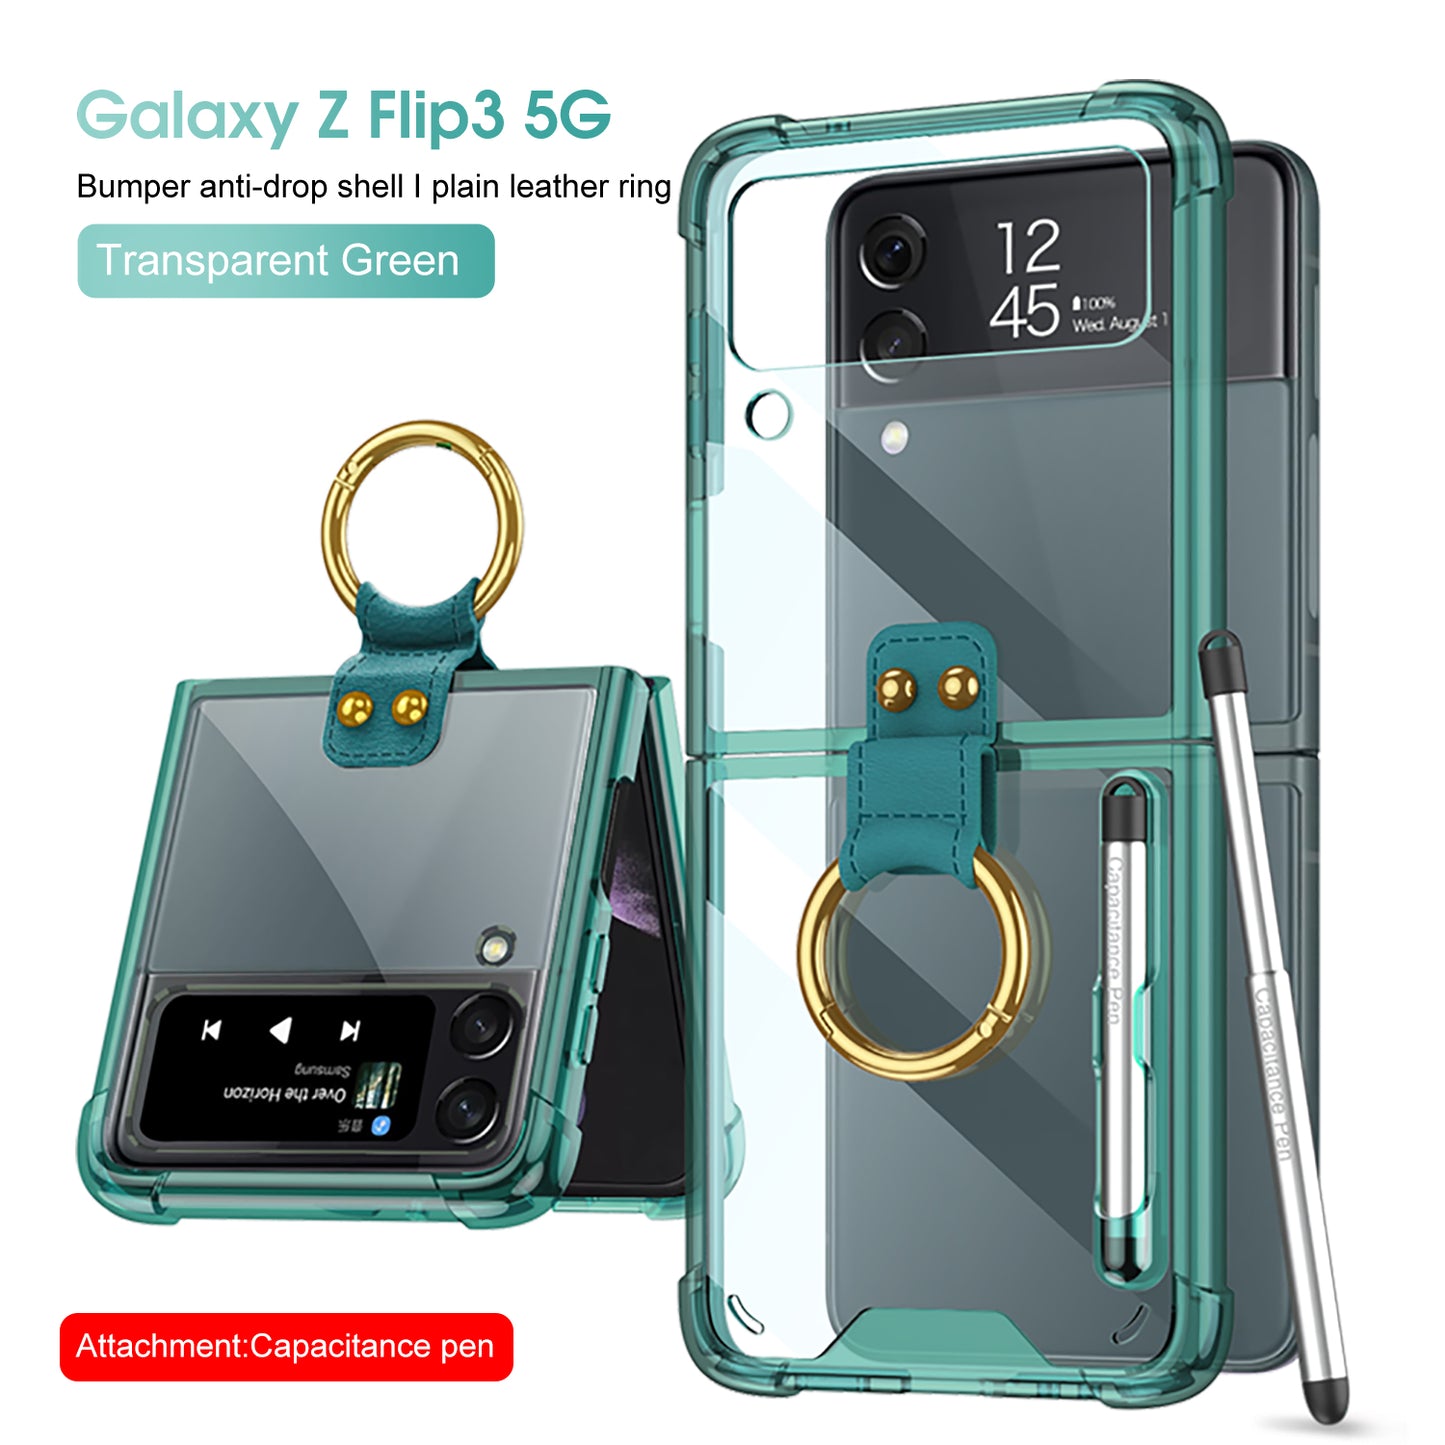 Airbag Corner Hard Silicone Case For Samsung Galaxy Z Flip 3 5G Case Included Capacitance Pen Slot Cover For Galaxy Z Flip 3